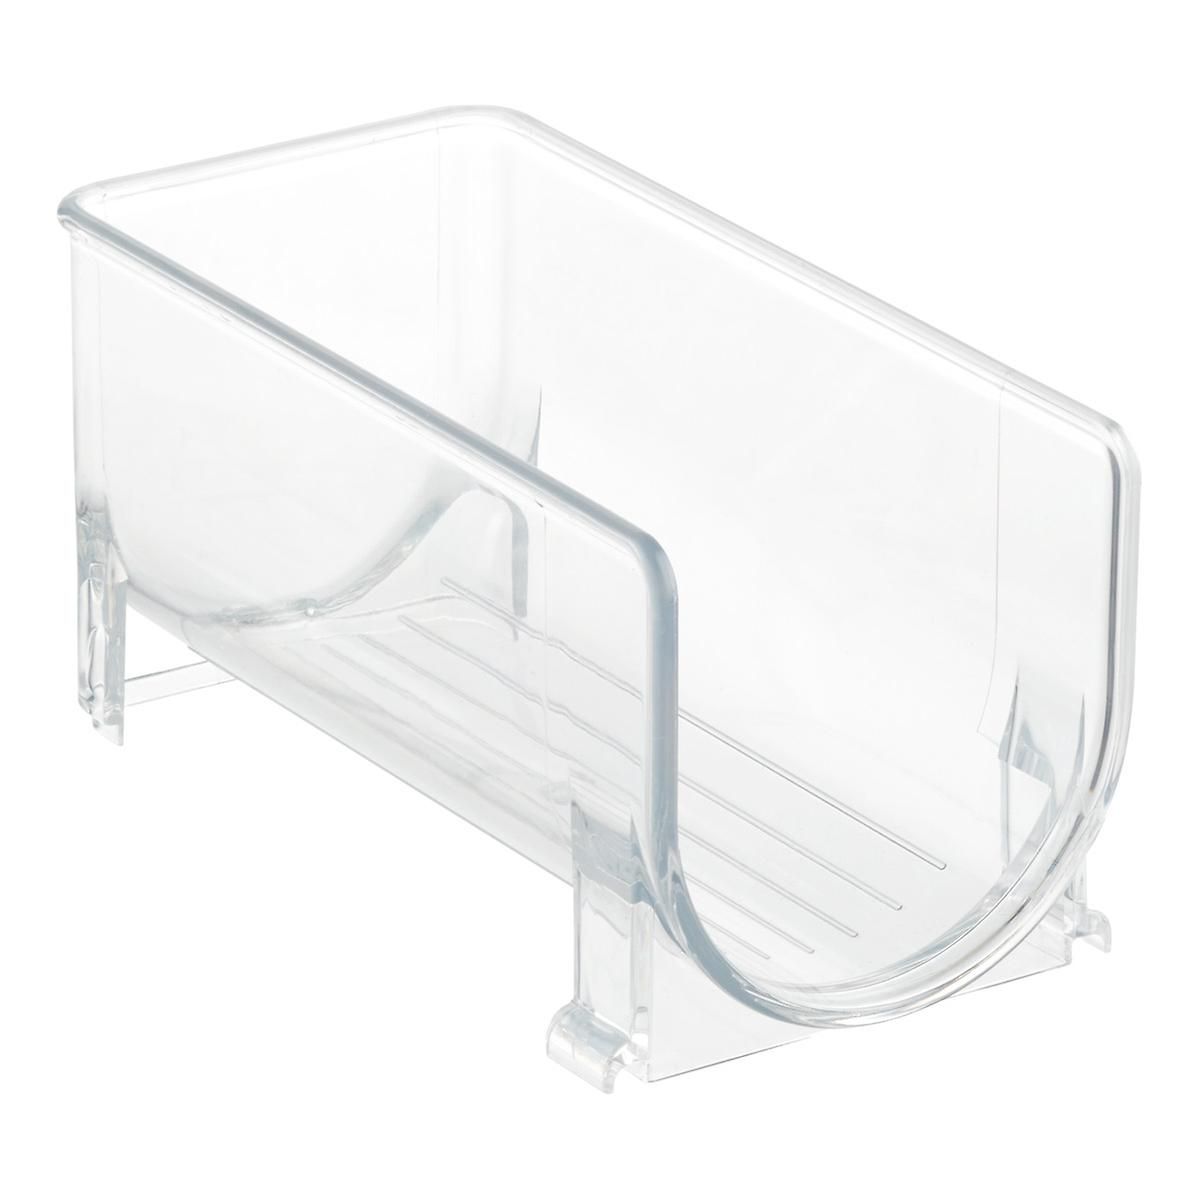 IDESIGN Fridge Bins Wine Holder Clear | The Container Store